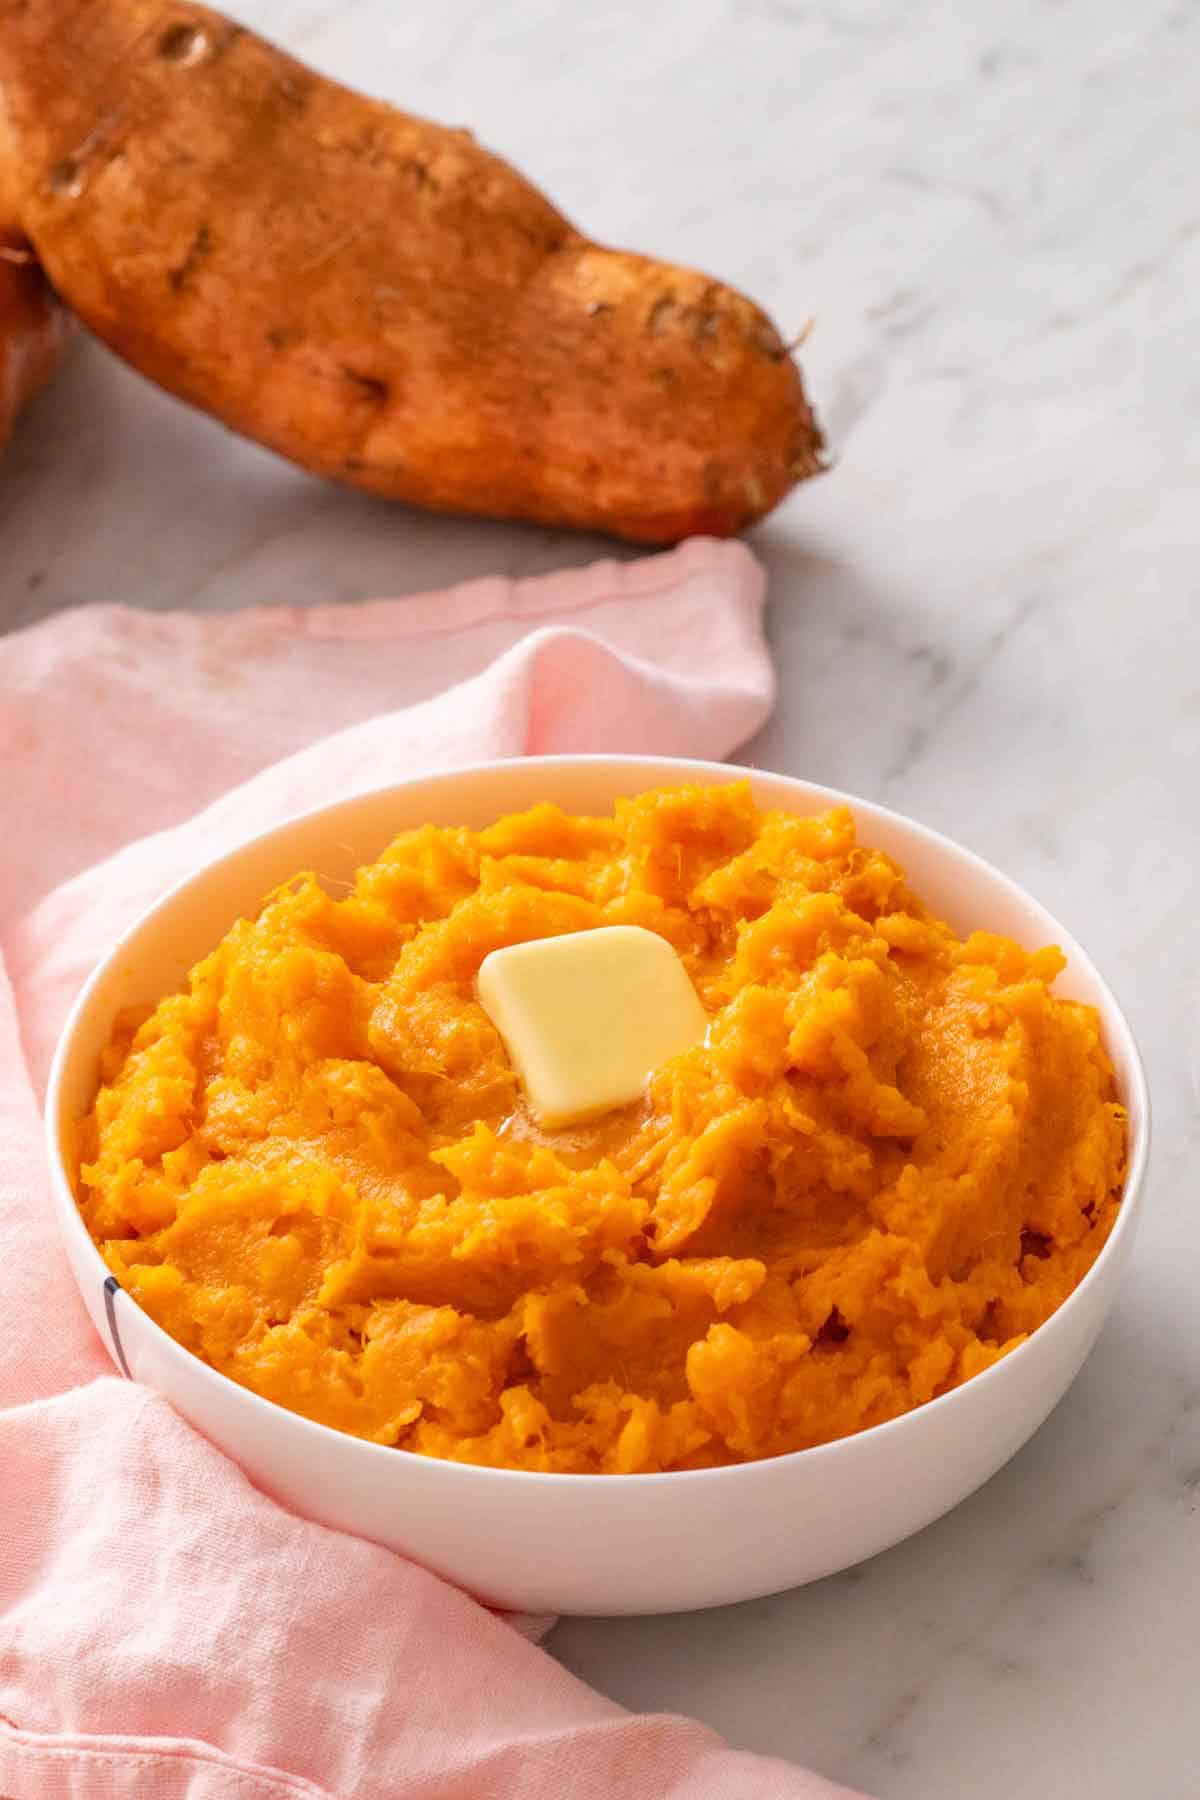 A bowl of mashed sweet potatoes with some slightly melted butter on top. A sweet potato in the background.